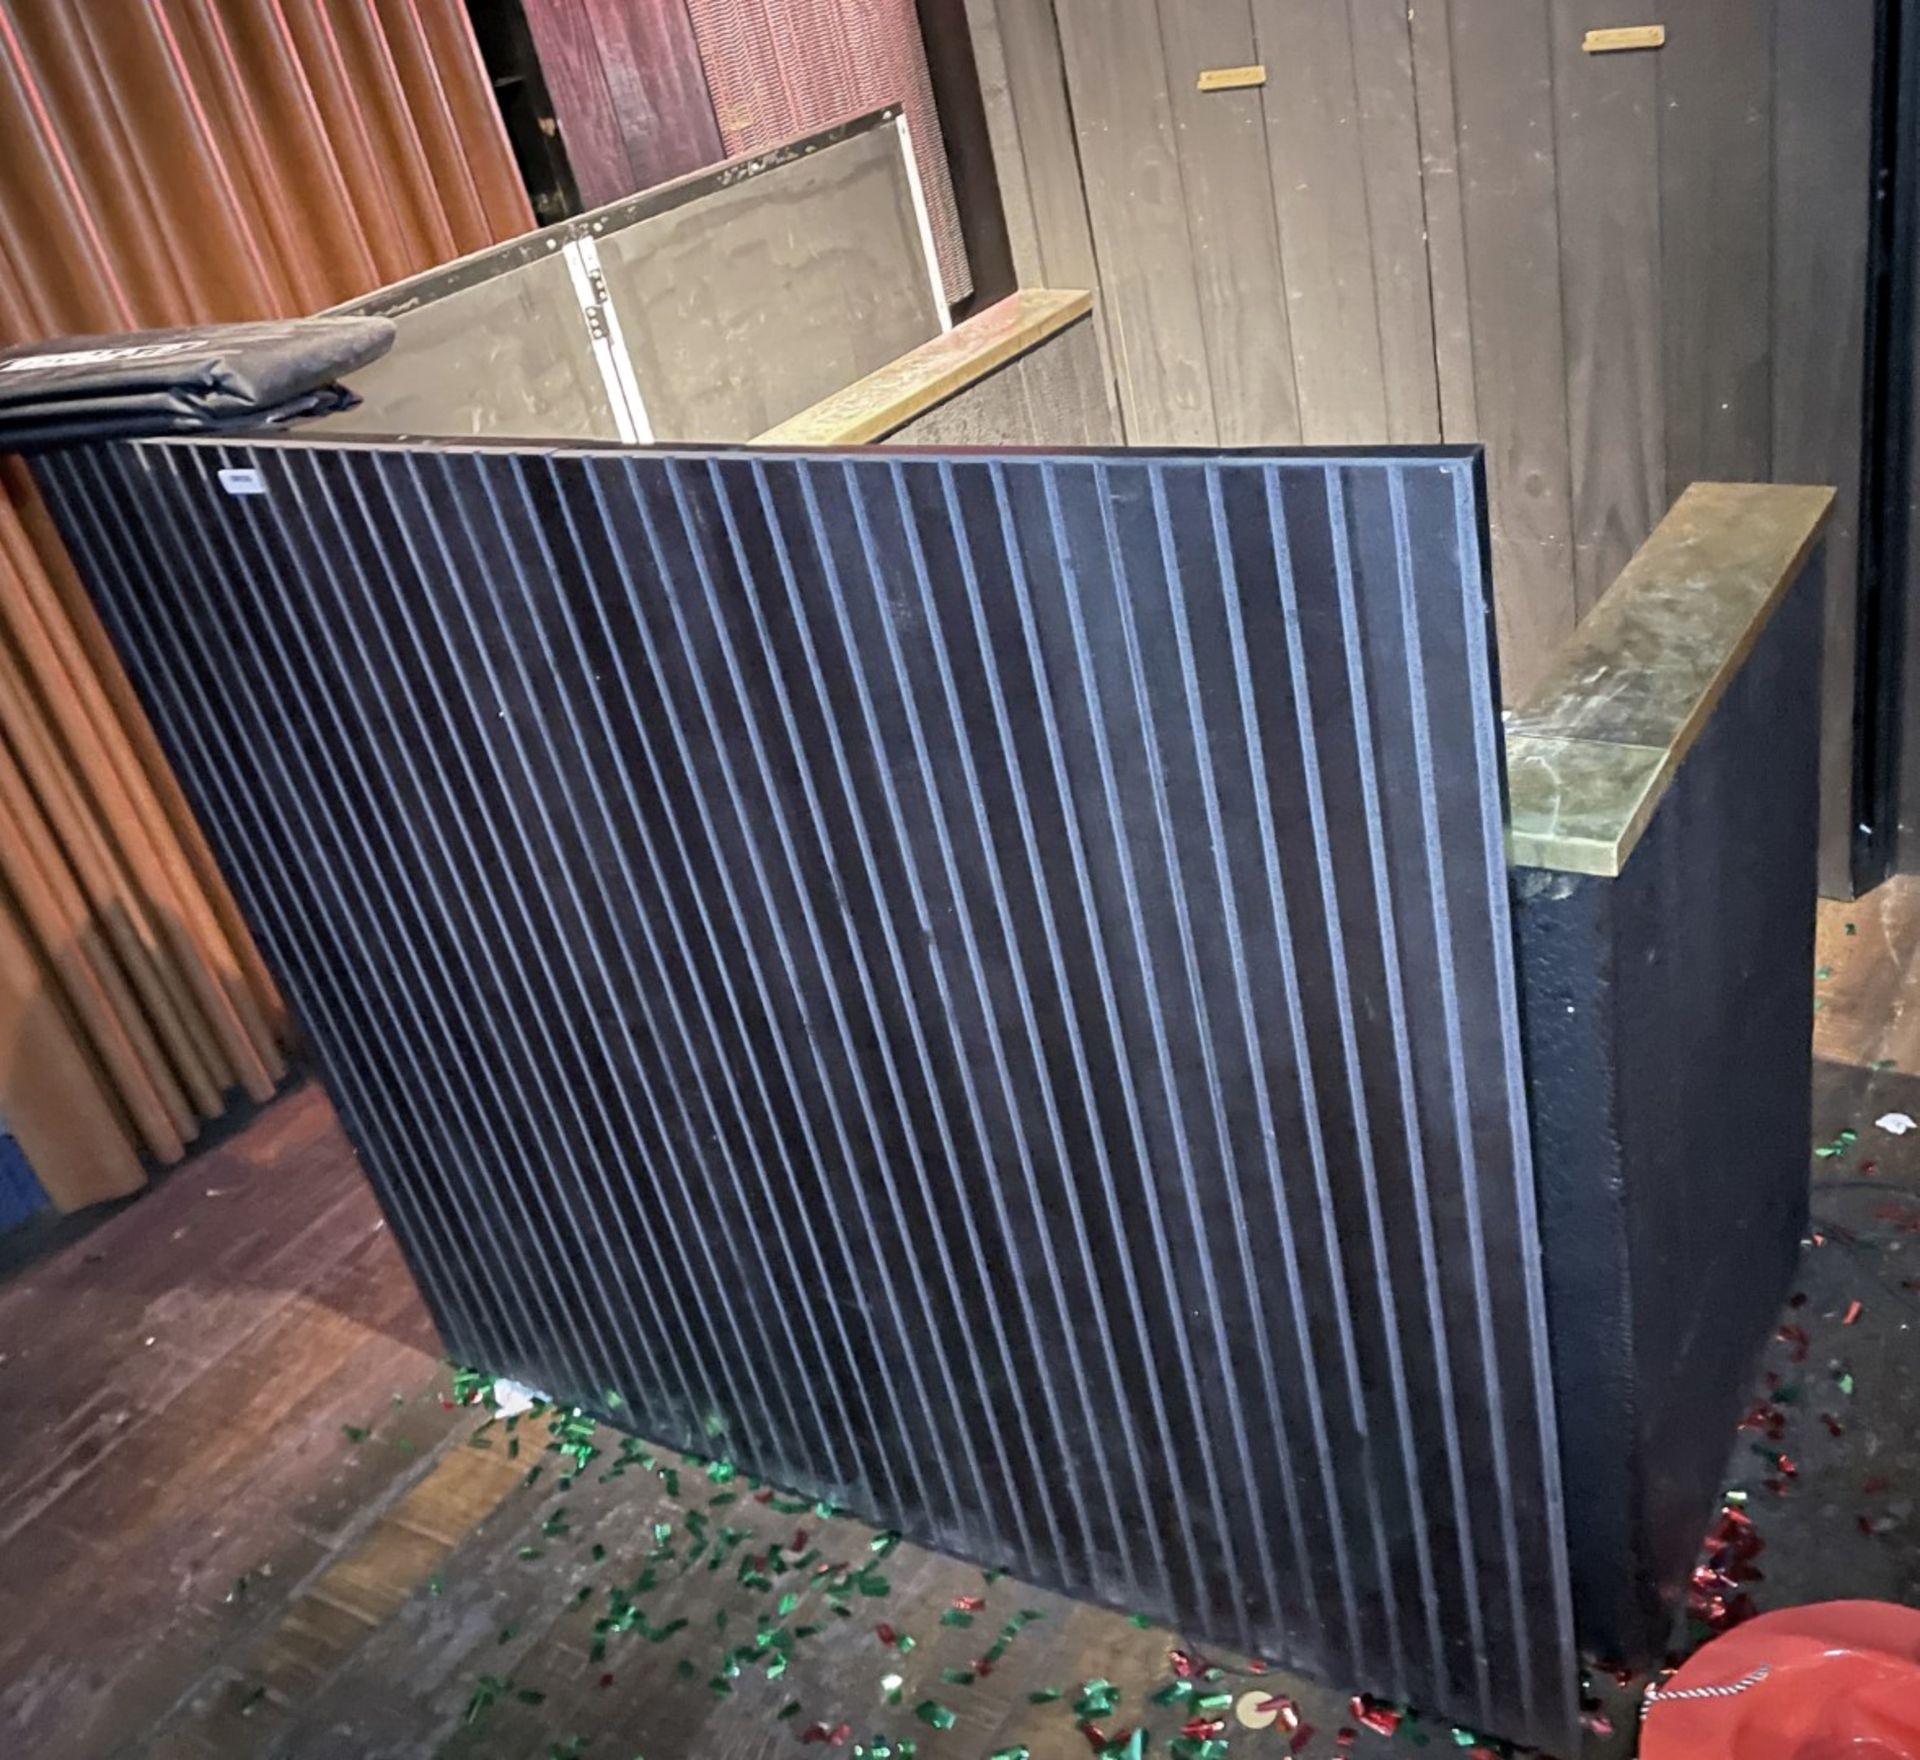 1 x Bespoke DJ Booth Area With a Burnt Charcoal Wood Finish and a Brass Counter Surround - Image 6 of 13